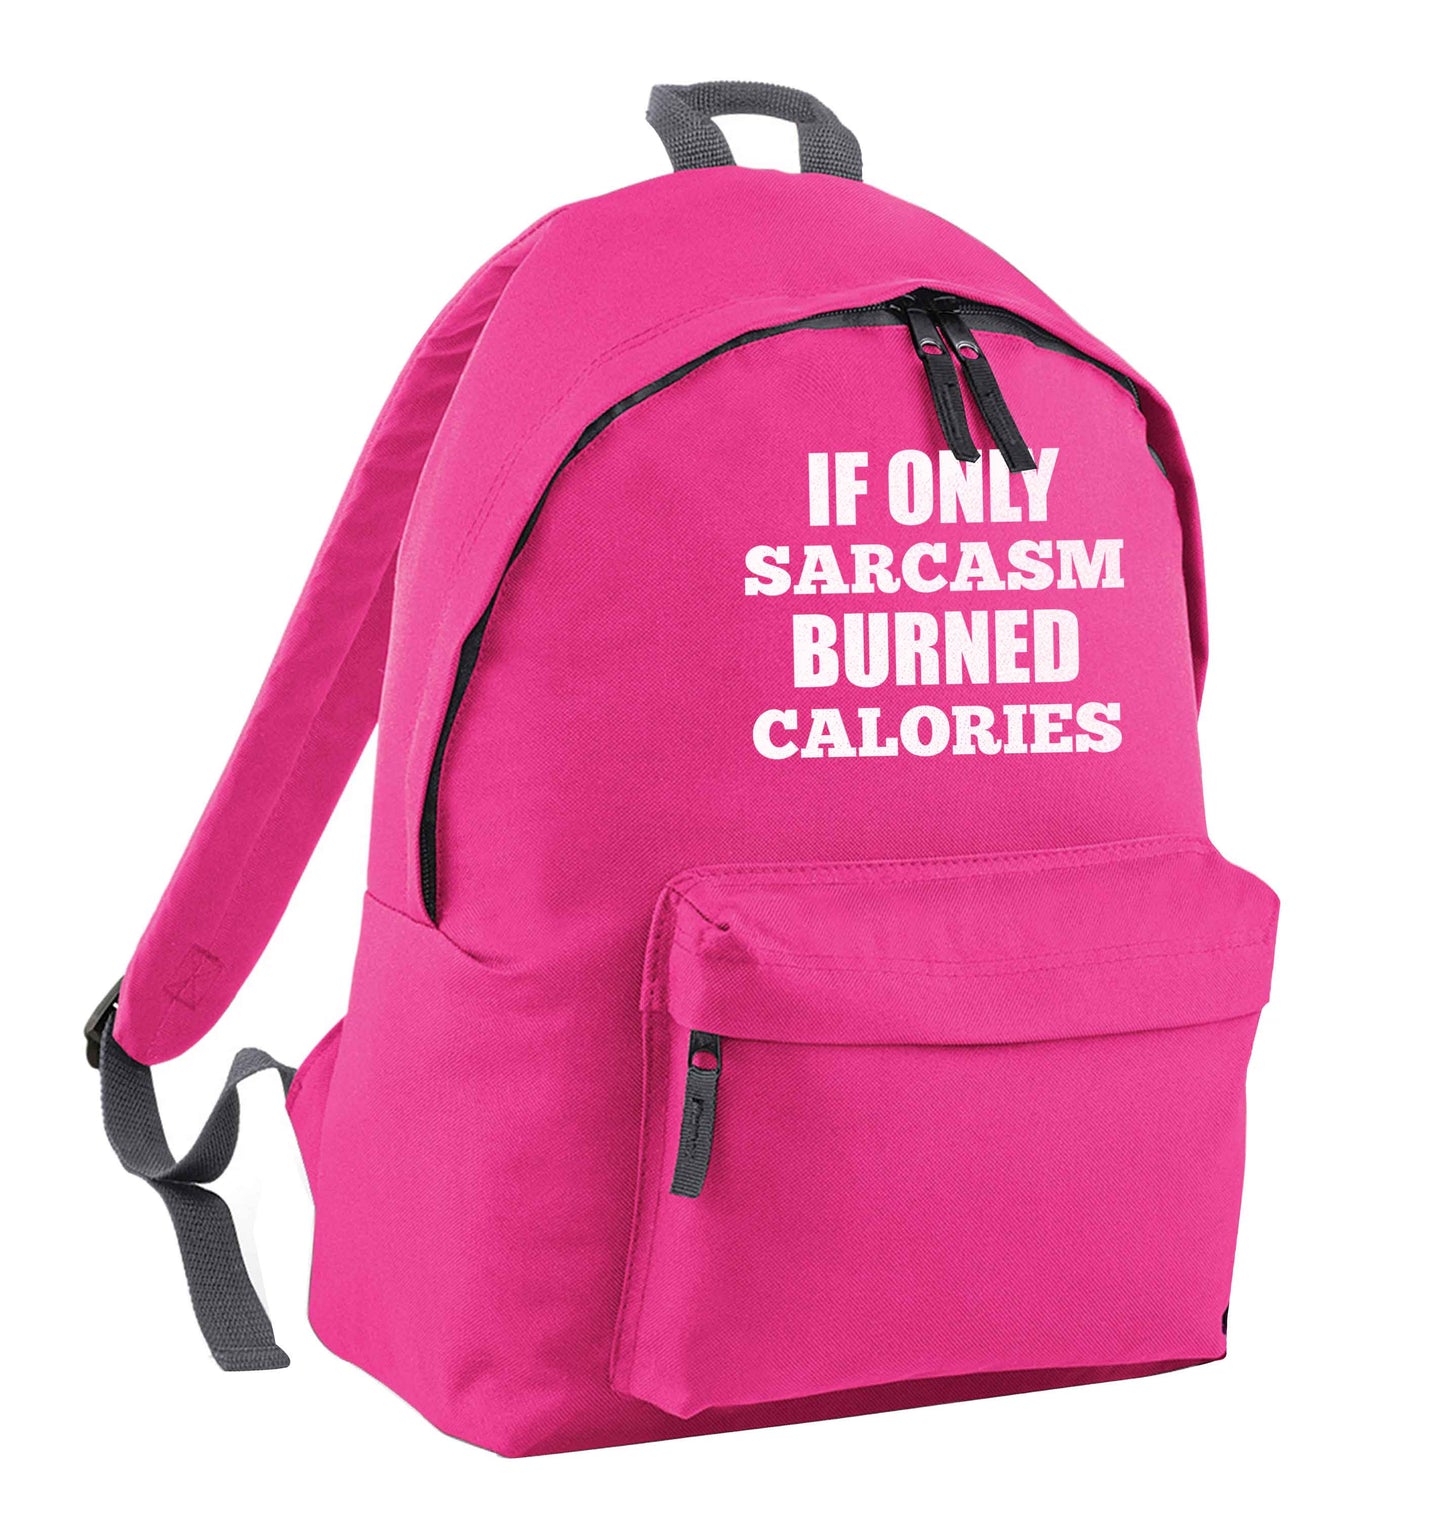 If only sarcasm burned calories pink adults backpack